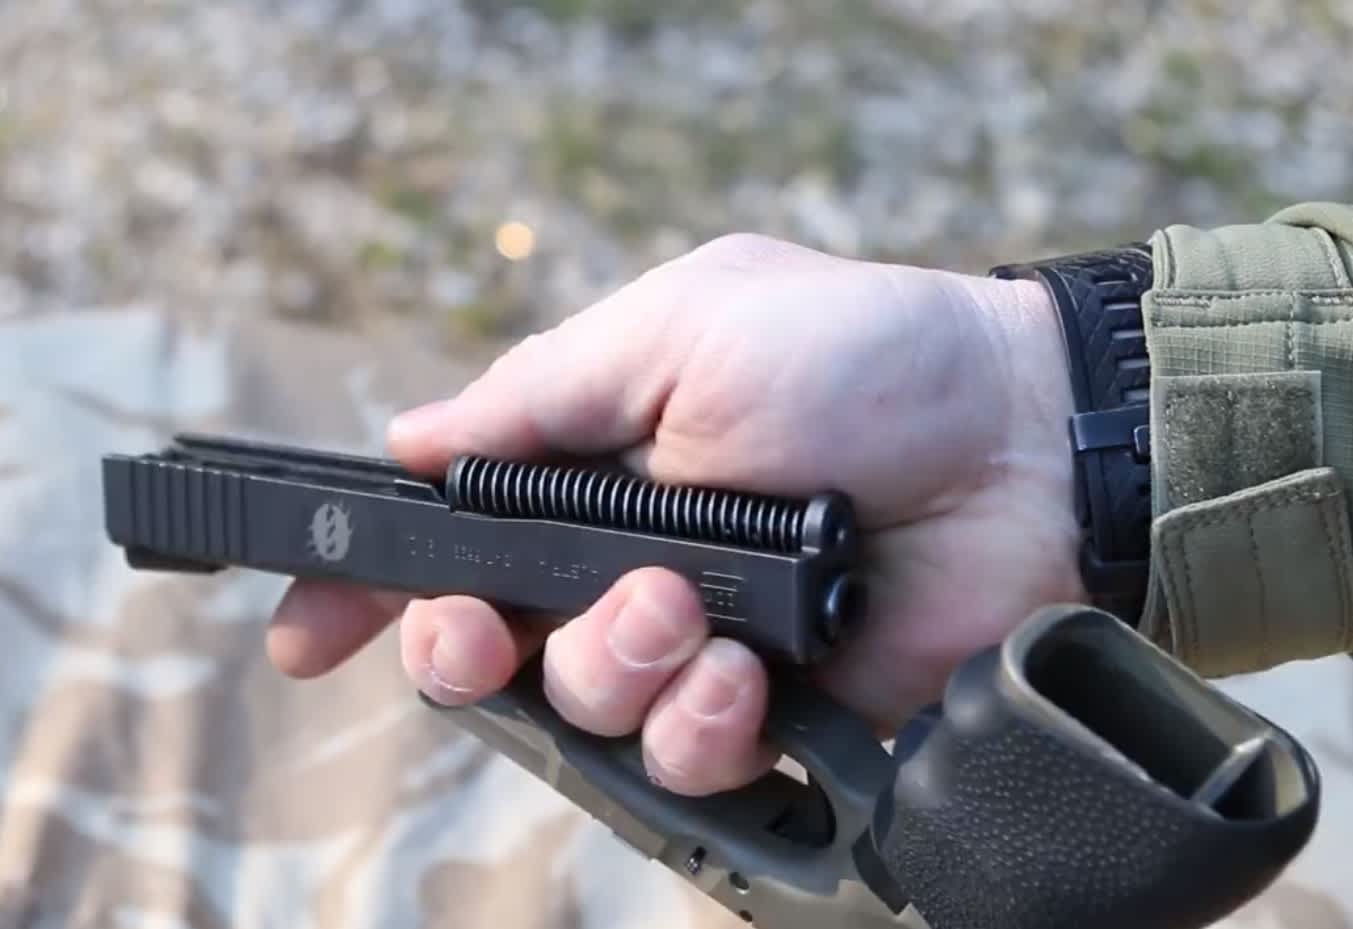 Video: Assembling and Firing a Glock 19 with One Hand